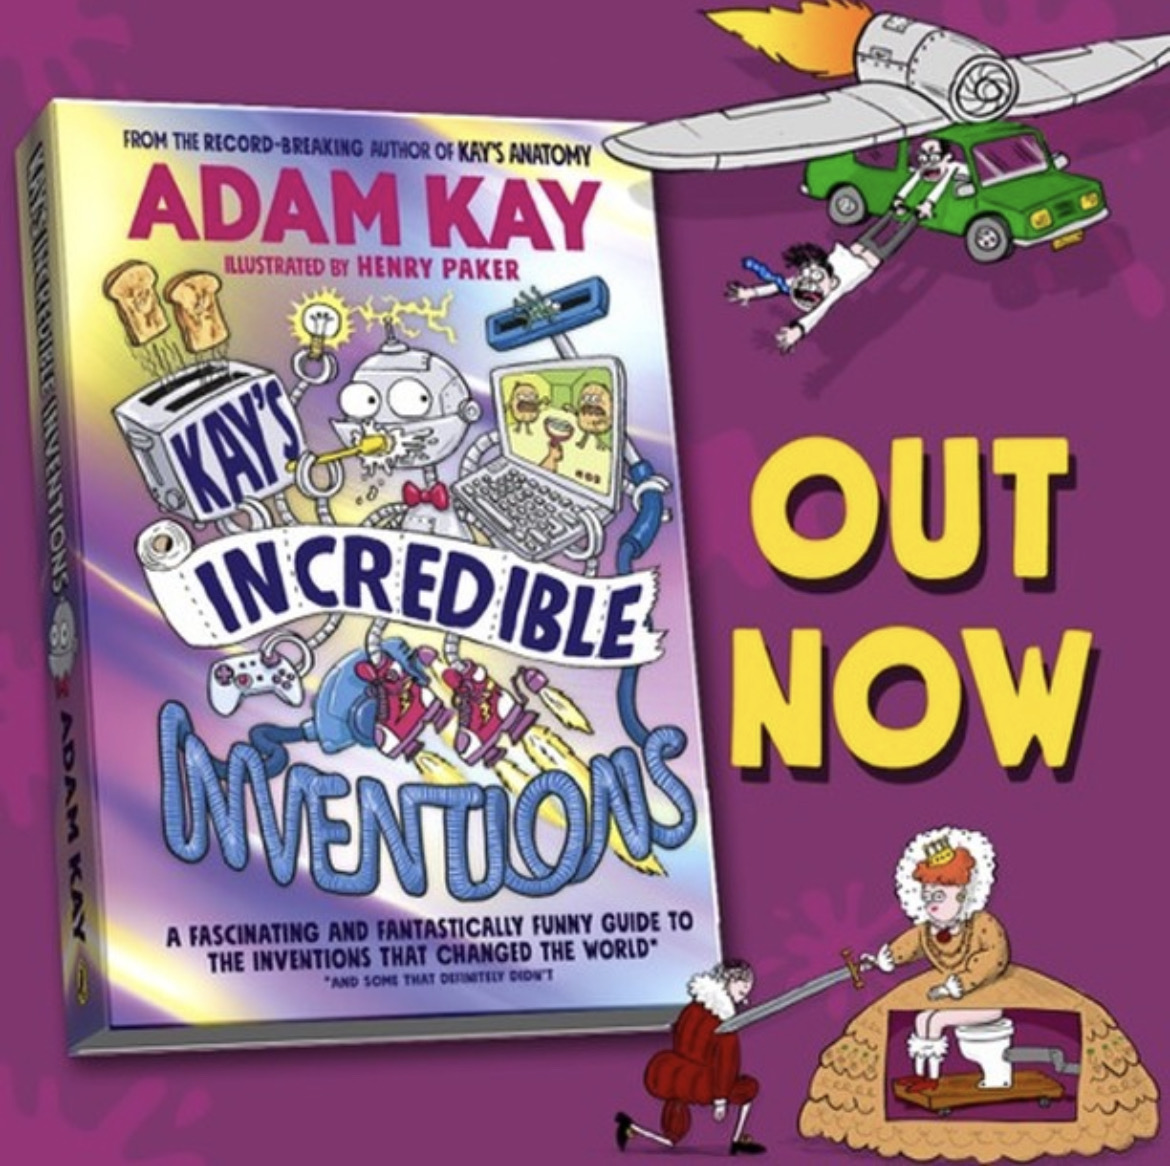 Kay’s Incredible Inventions by Adam Kay, illustrated by Henry Paker, is ...